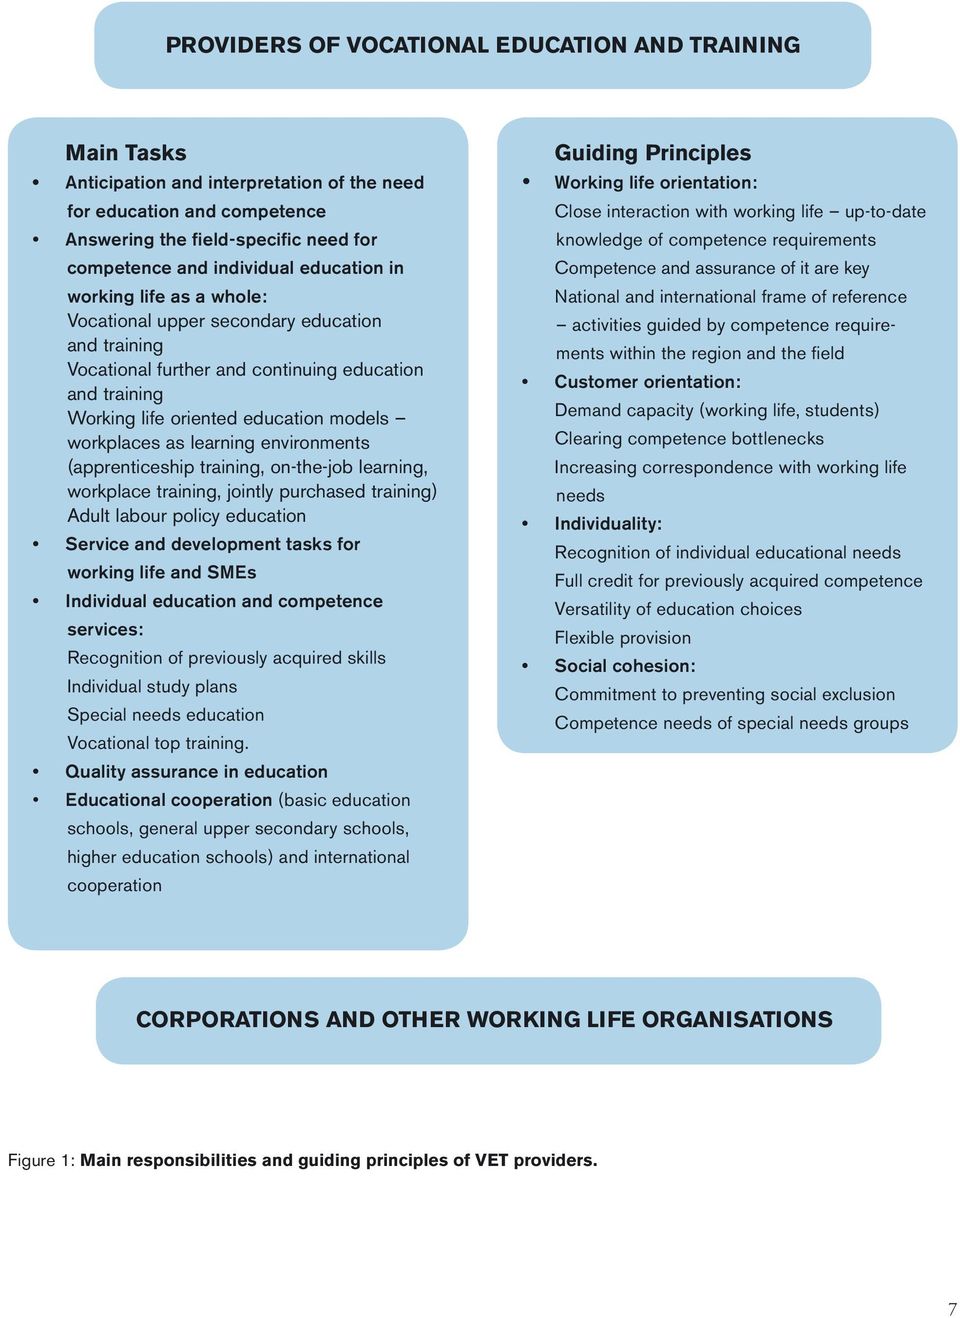 learning environments (apprenticeship training, on-the-job learning, workplace training, jointly purchased training) Adult labour policy education Service and development tasks for working life and